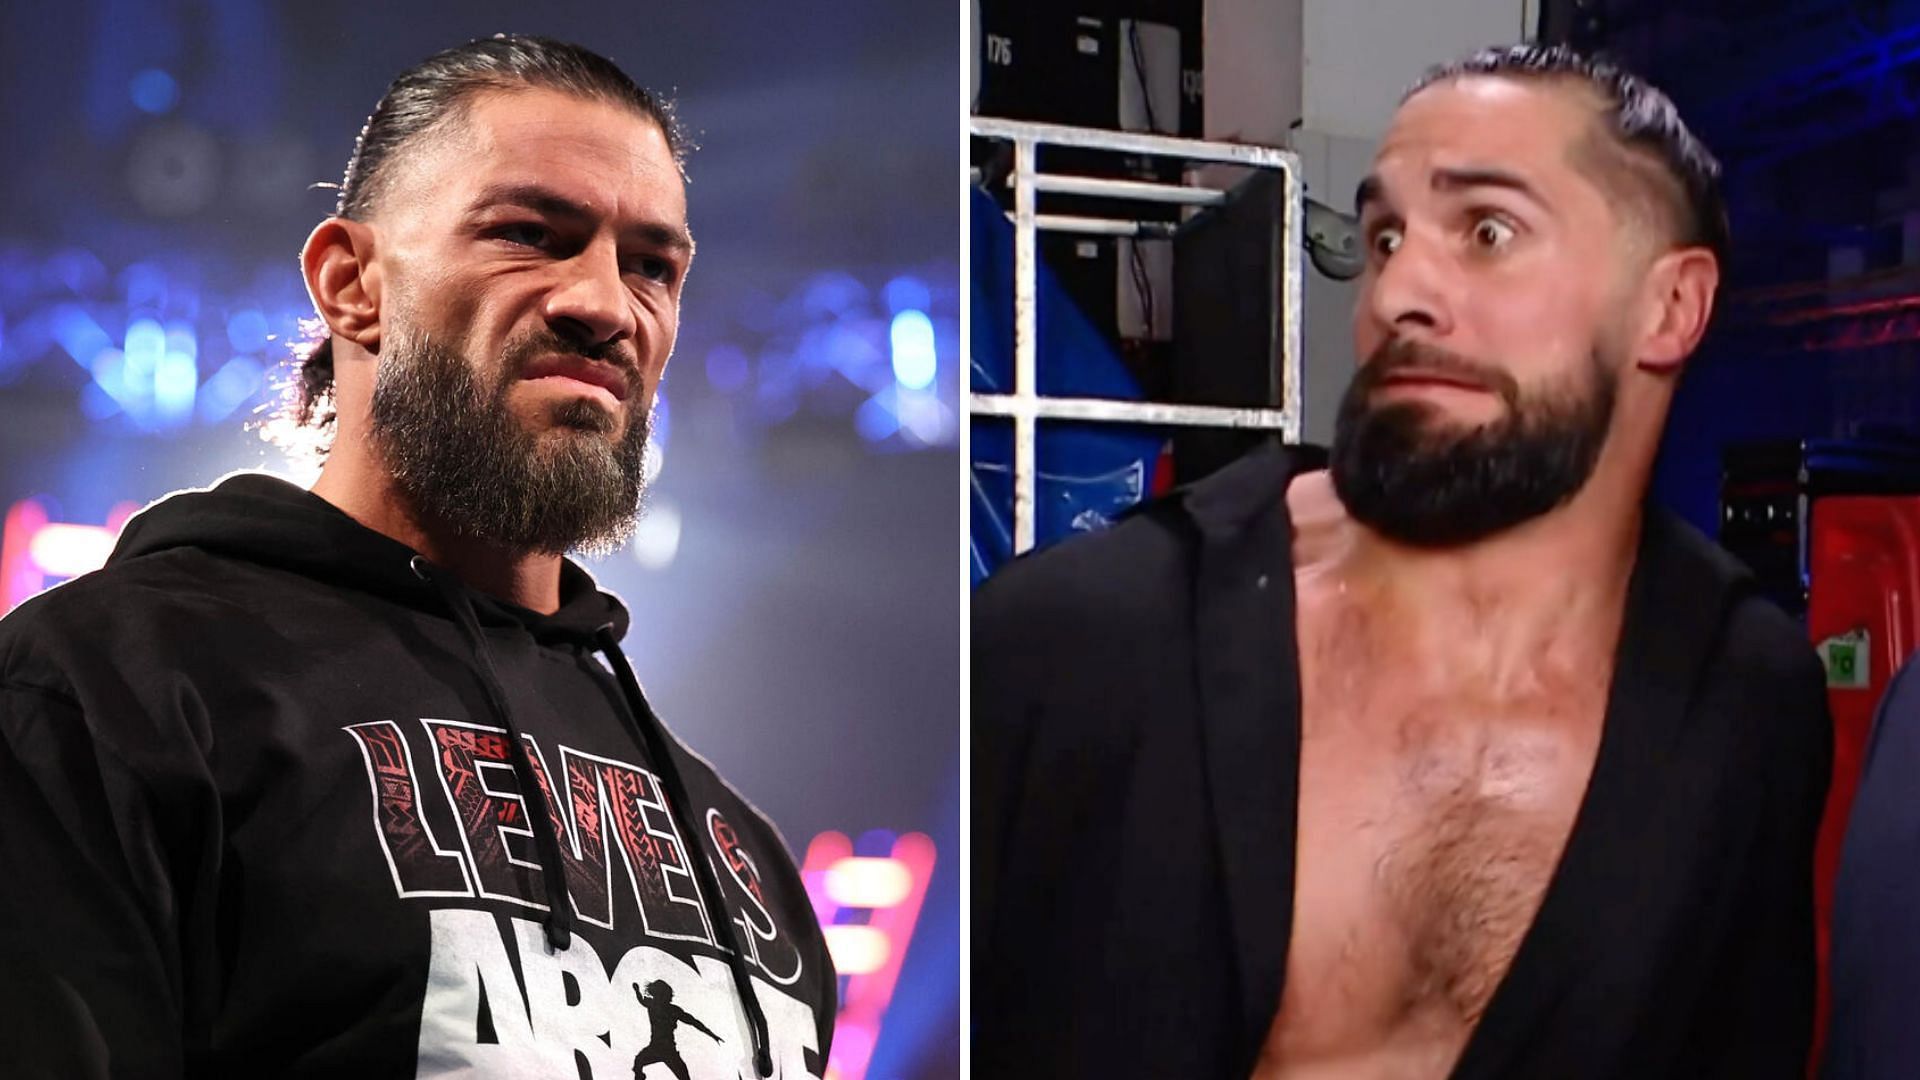 Roman Reigns on the left, Seth Rollins on the right [Image credits: wwe.com and Rollins